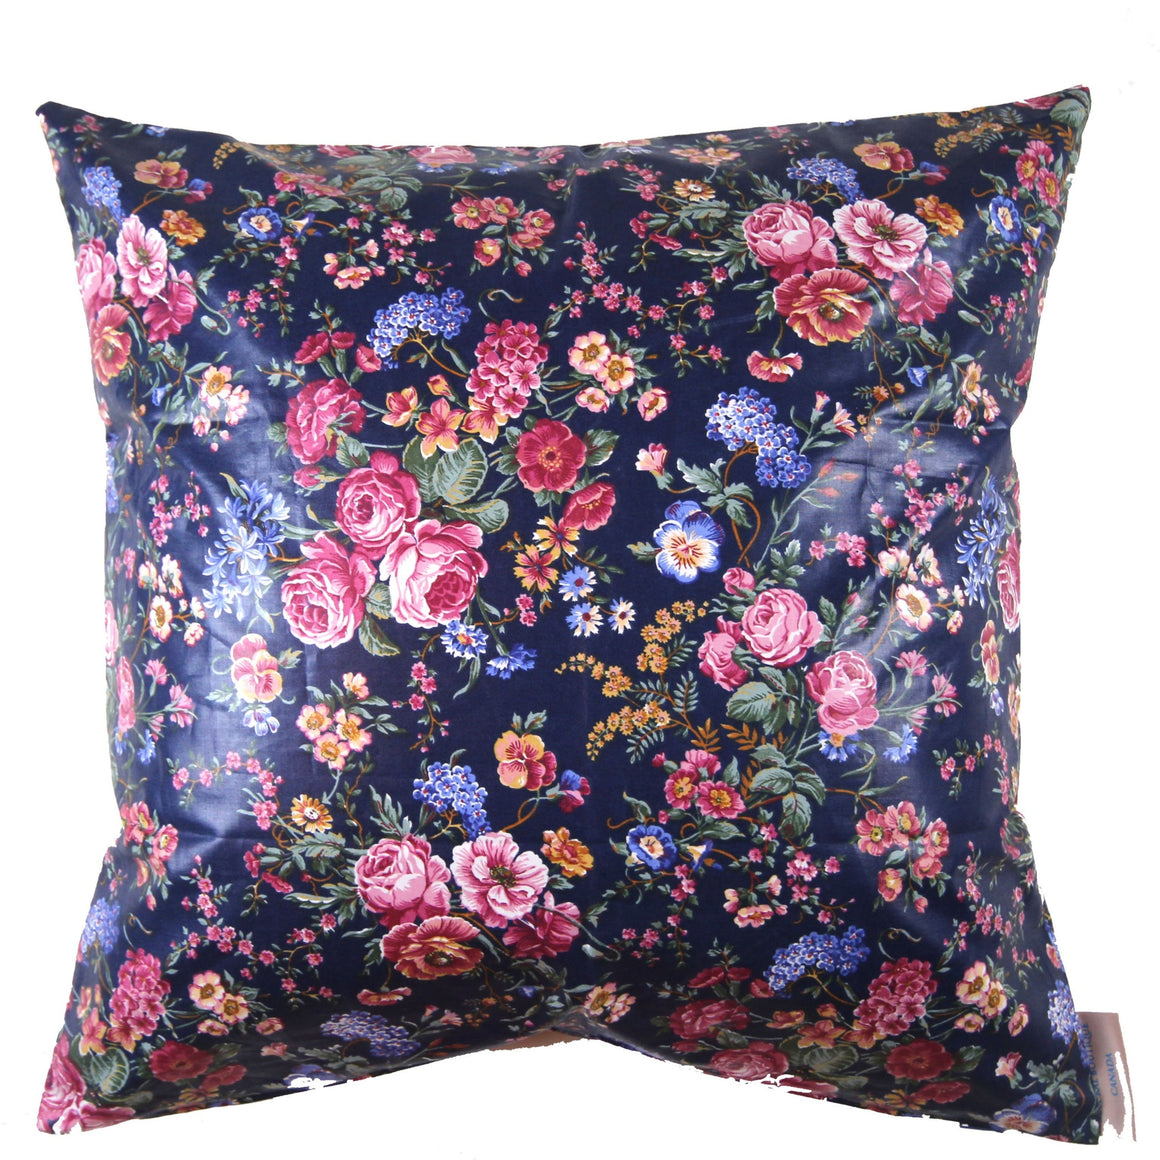 Priscilla - Blue Floral French Country Decorative Pillow Cover- 20x20 - Maa-Kal Boutique Canada